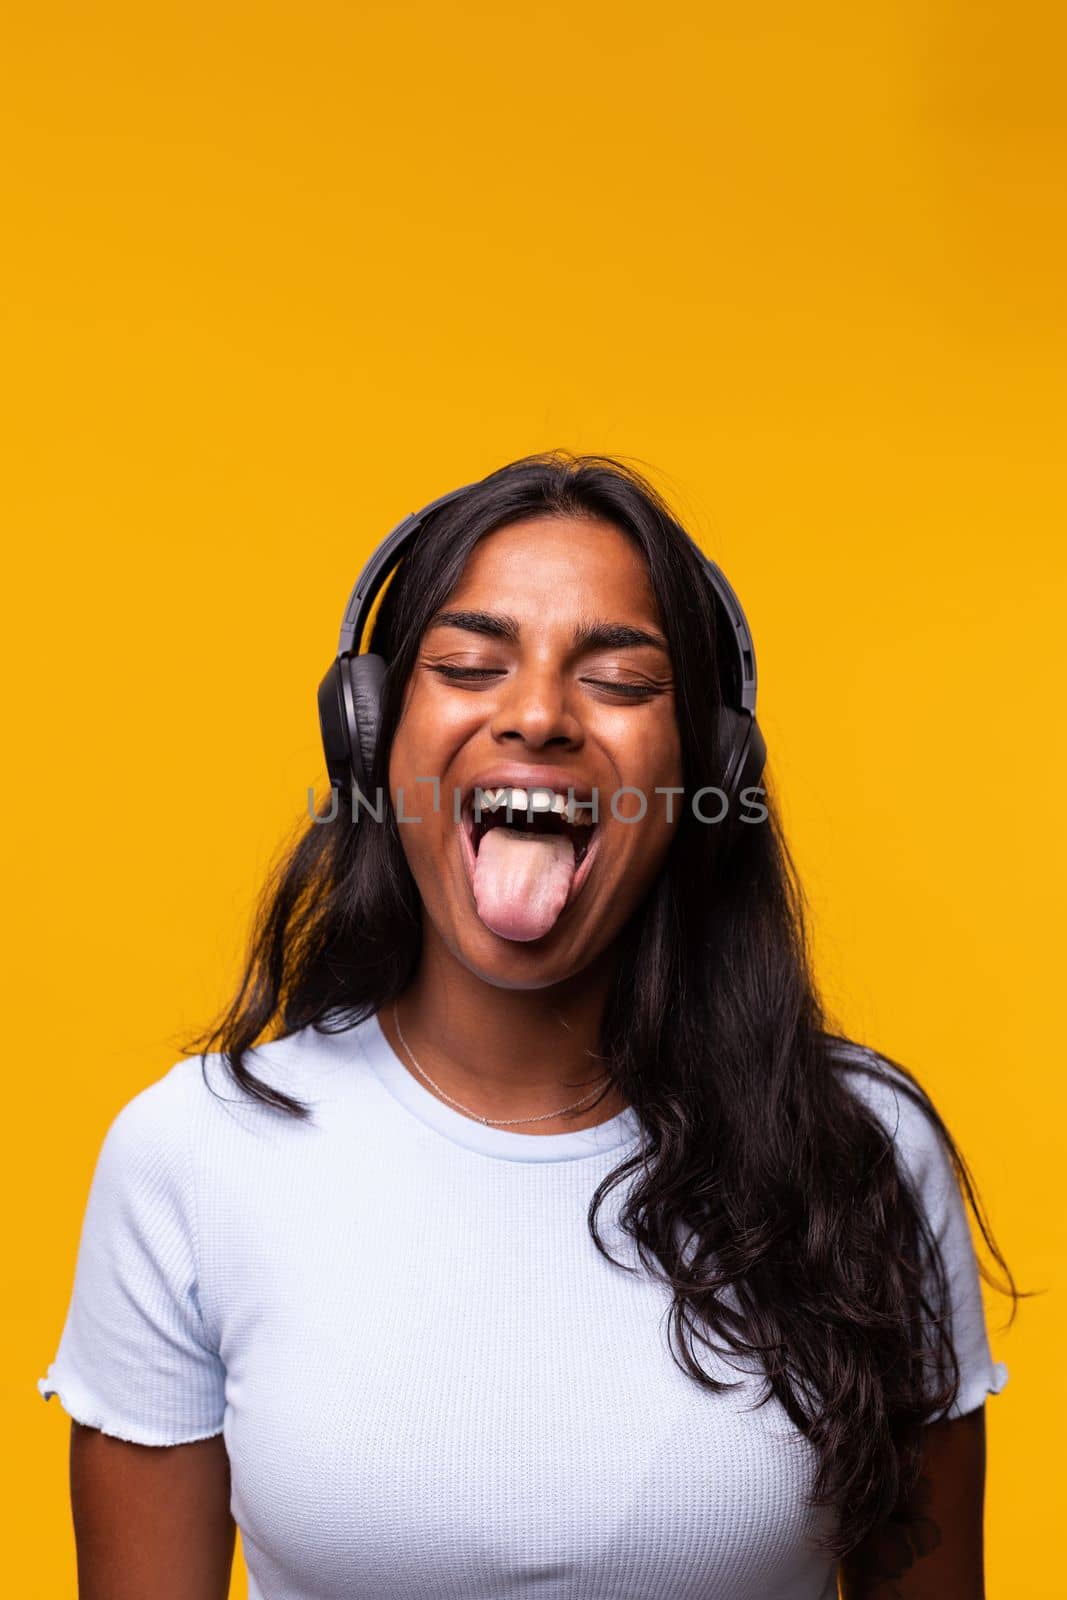 Vertical portrait of happy young Indian woman wearing wireless headphones showing tongue to camera. Yellow background. by Hoverstock